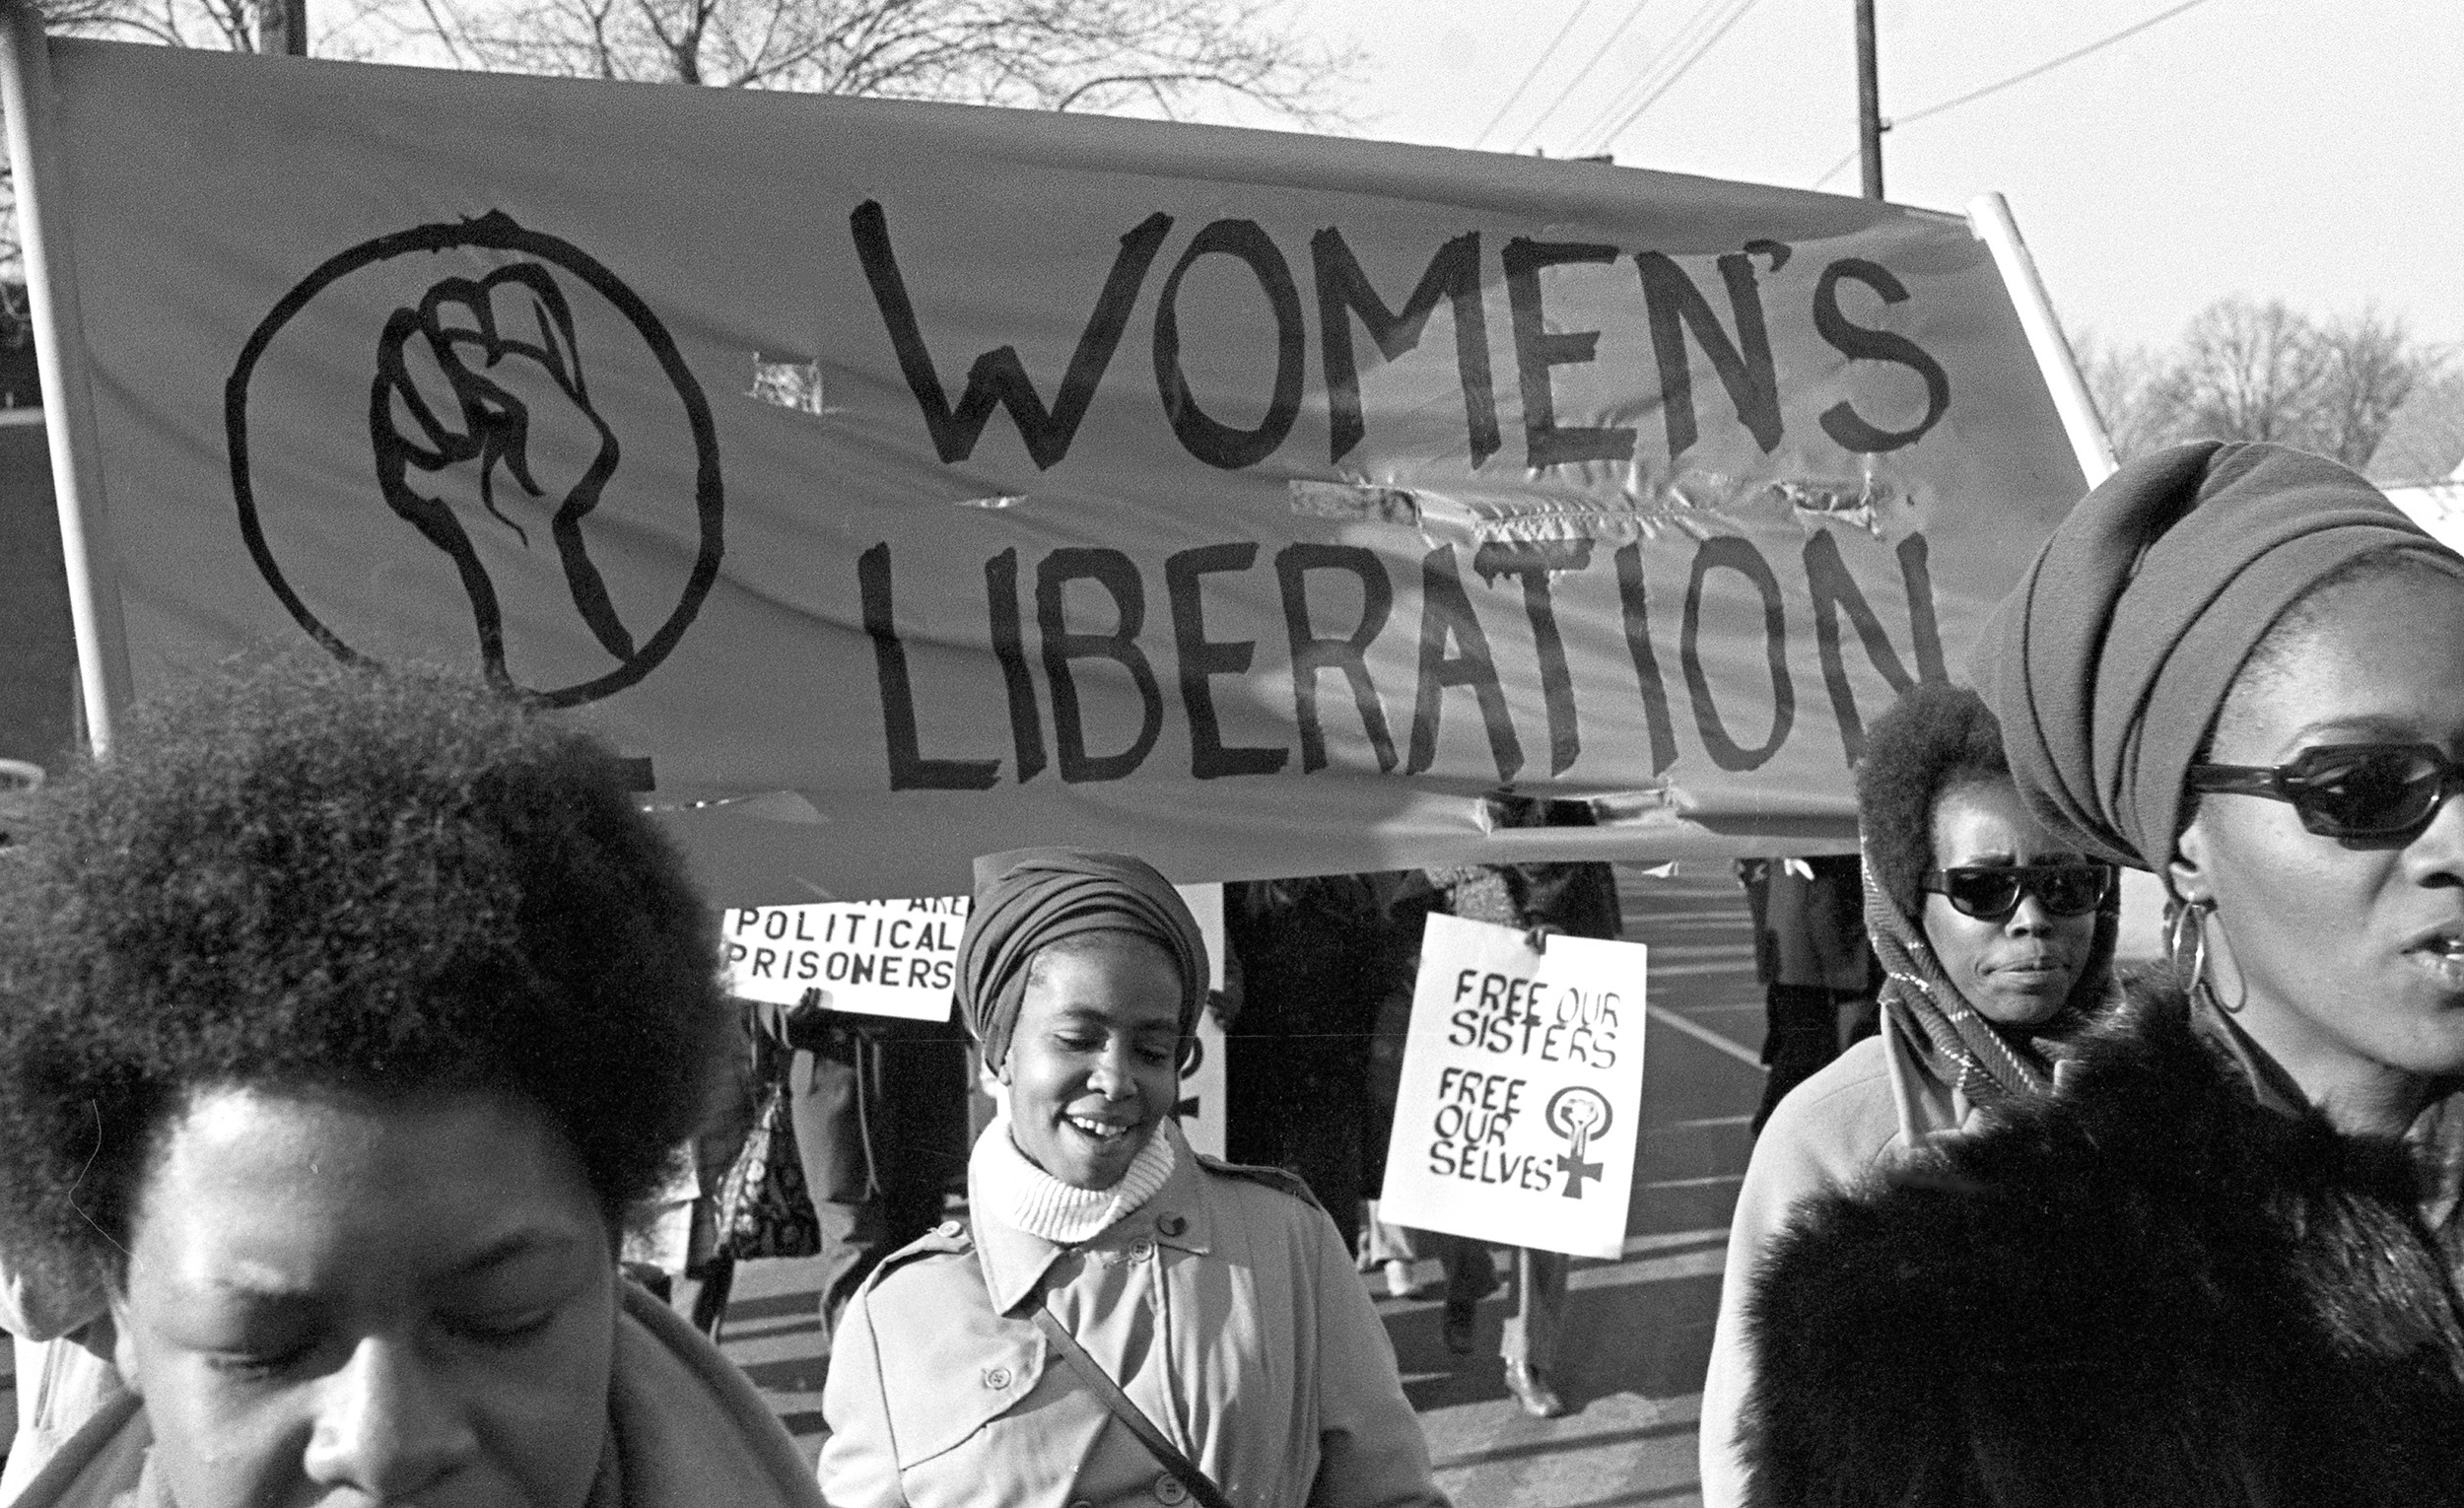 Alt text: Black women marching for their liberation